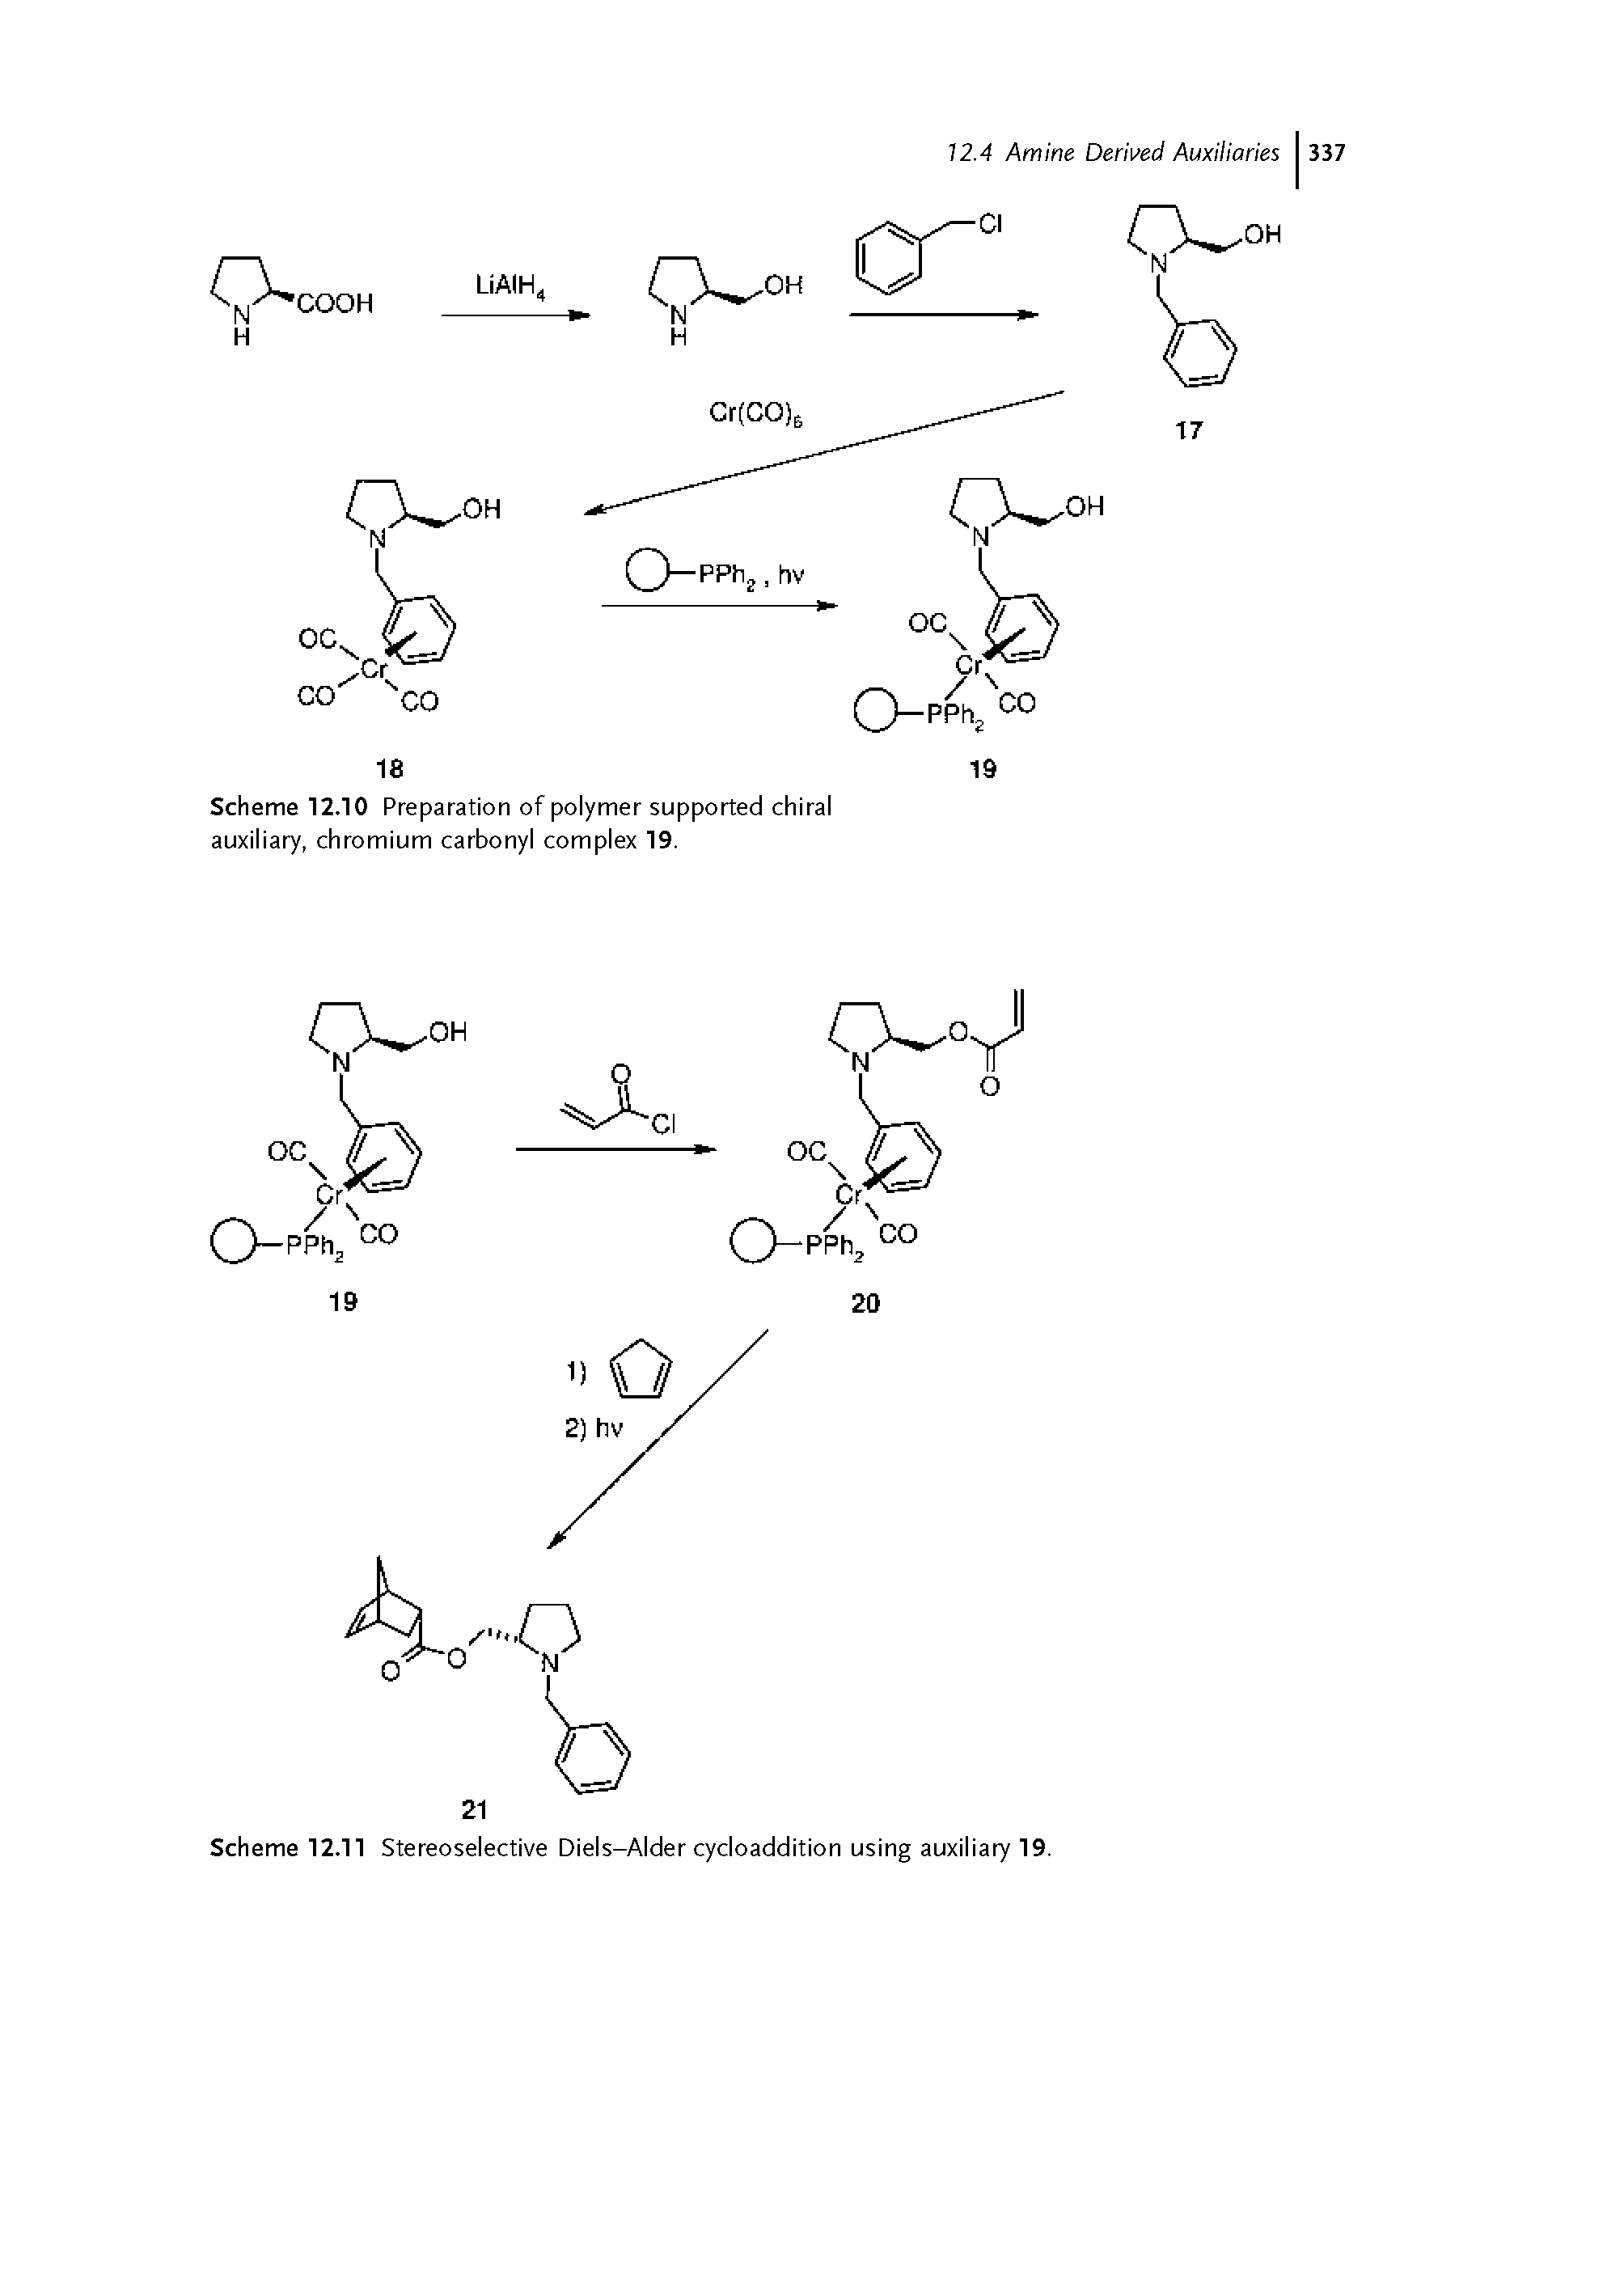 Scheme 12.10 Preparation of polymer supported chiral auxiliary, chromium carbonyl complex 19.